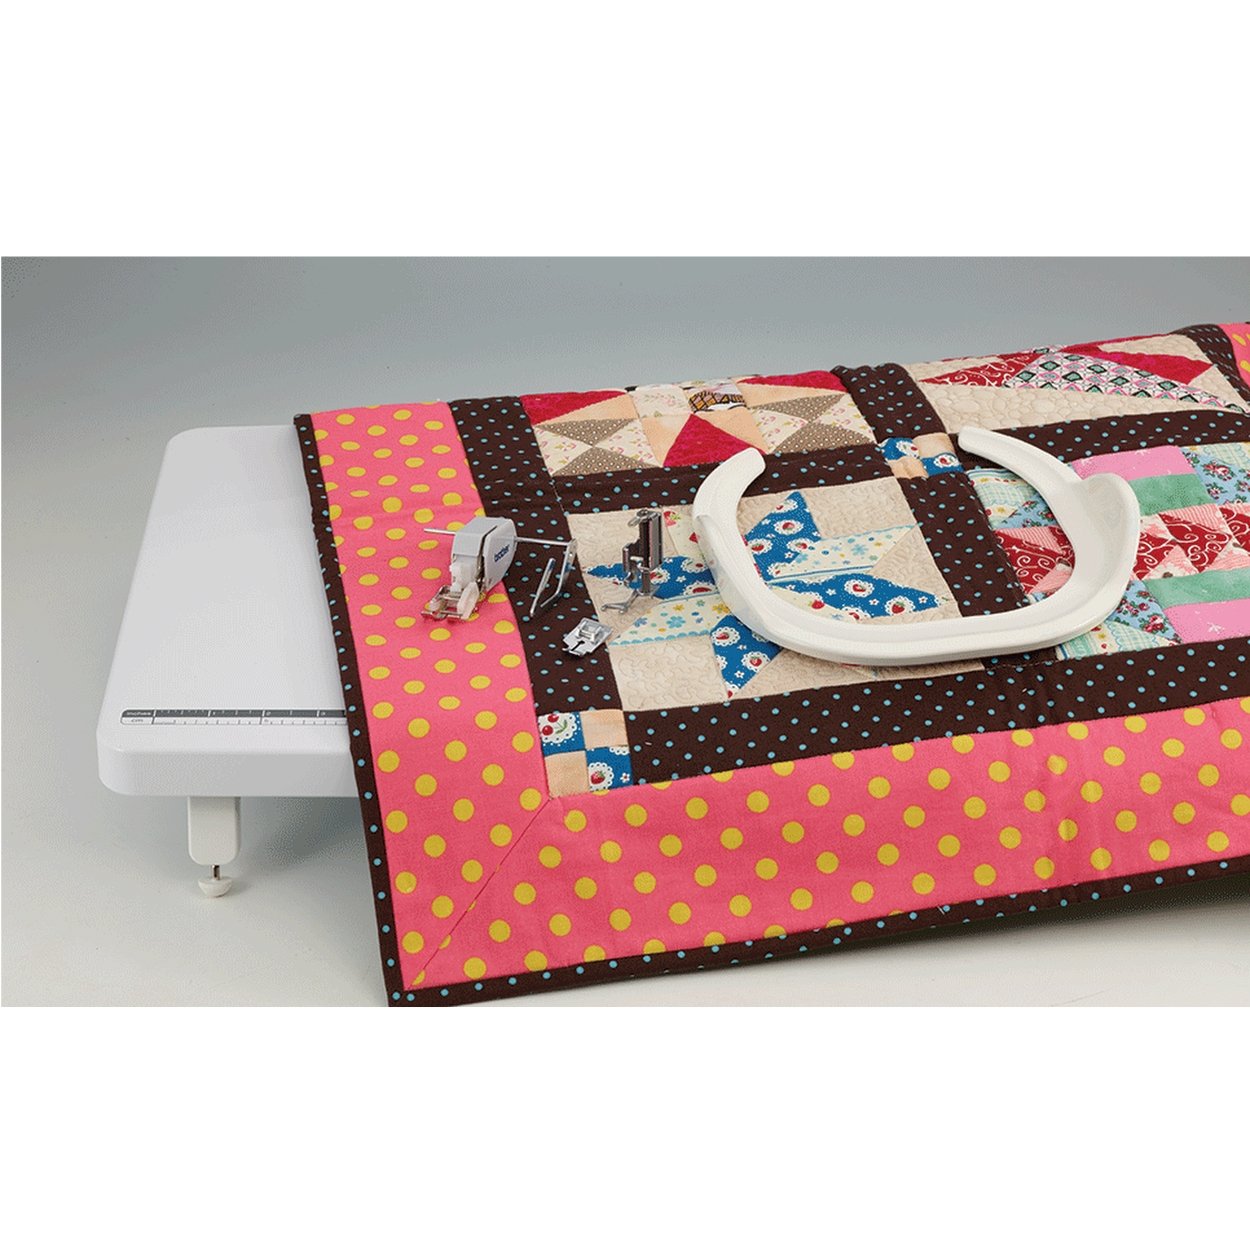 Brother F420 Creative Kit - including Sew Table from Jaycotts Sewing Supplies